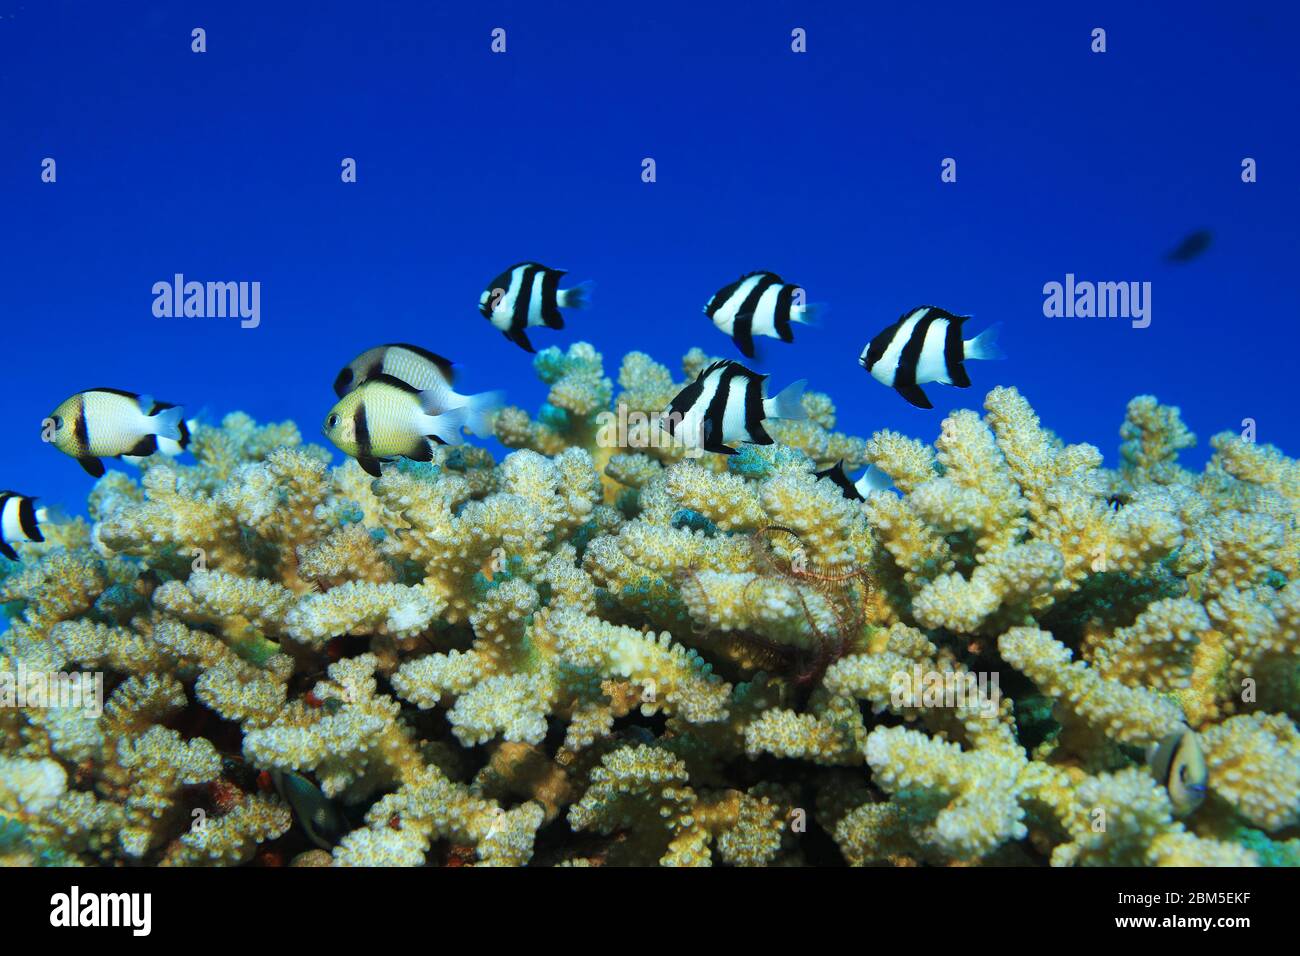 Cloudy dascyllus fish (Dascyllus carneus) and Whitetail dascyllus fish (Dascyllus aruanus) live together underwater in the coral reef of the Maldives Stock Photo